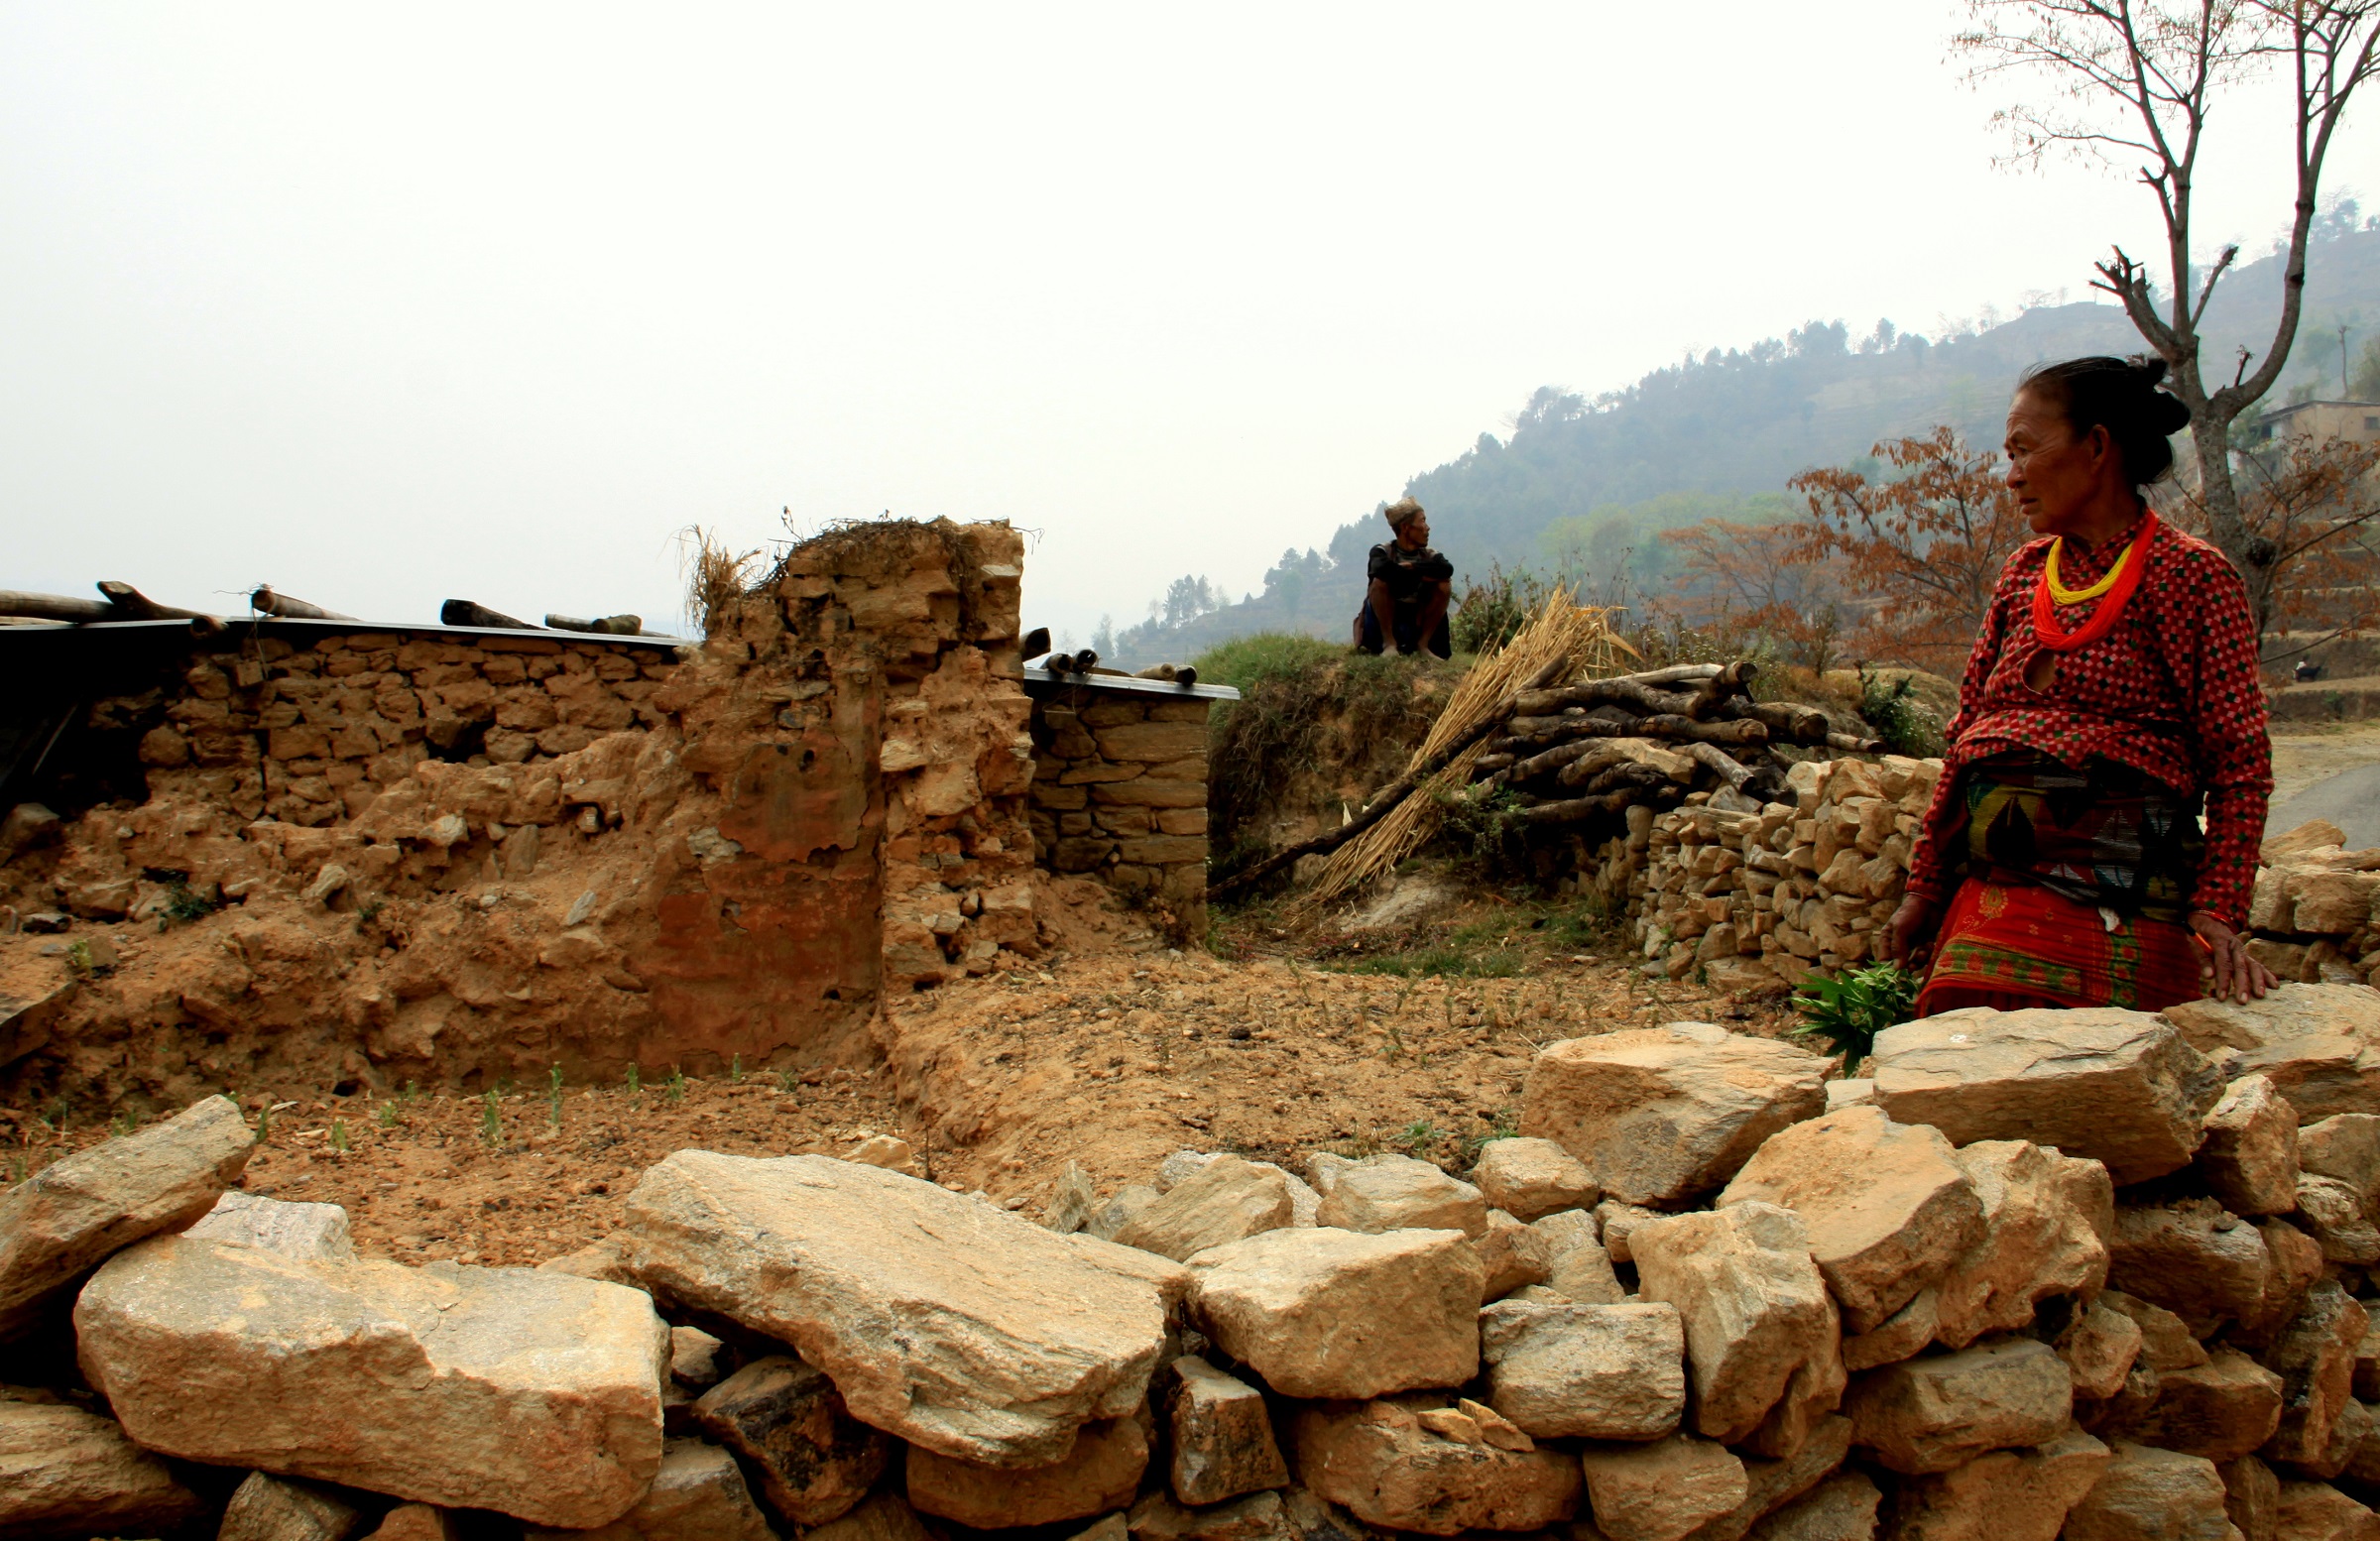 An elderly couple at the site of their house in Nanglebari, Nepal, that was destroyed by the 2015 earthquake. © 2016 Leesha Manju, Courtesy of Photoshare